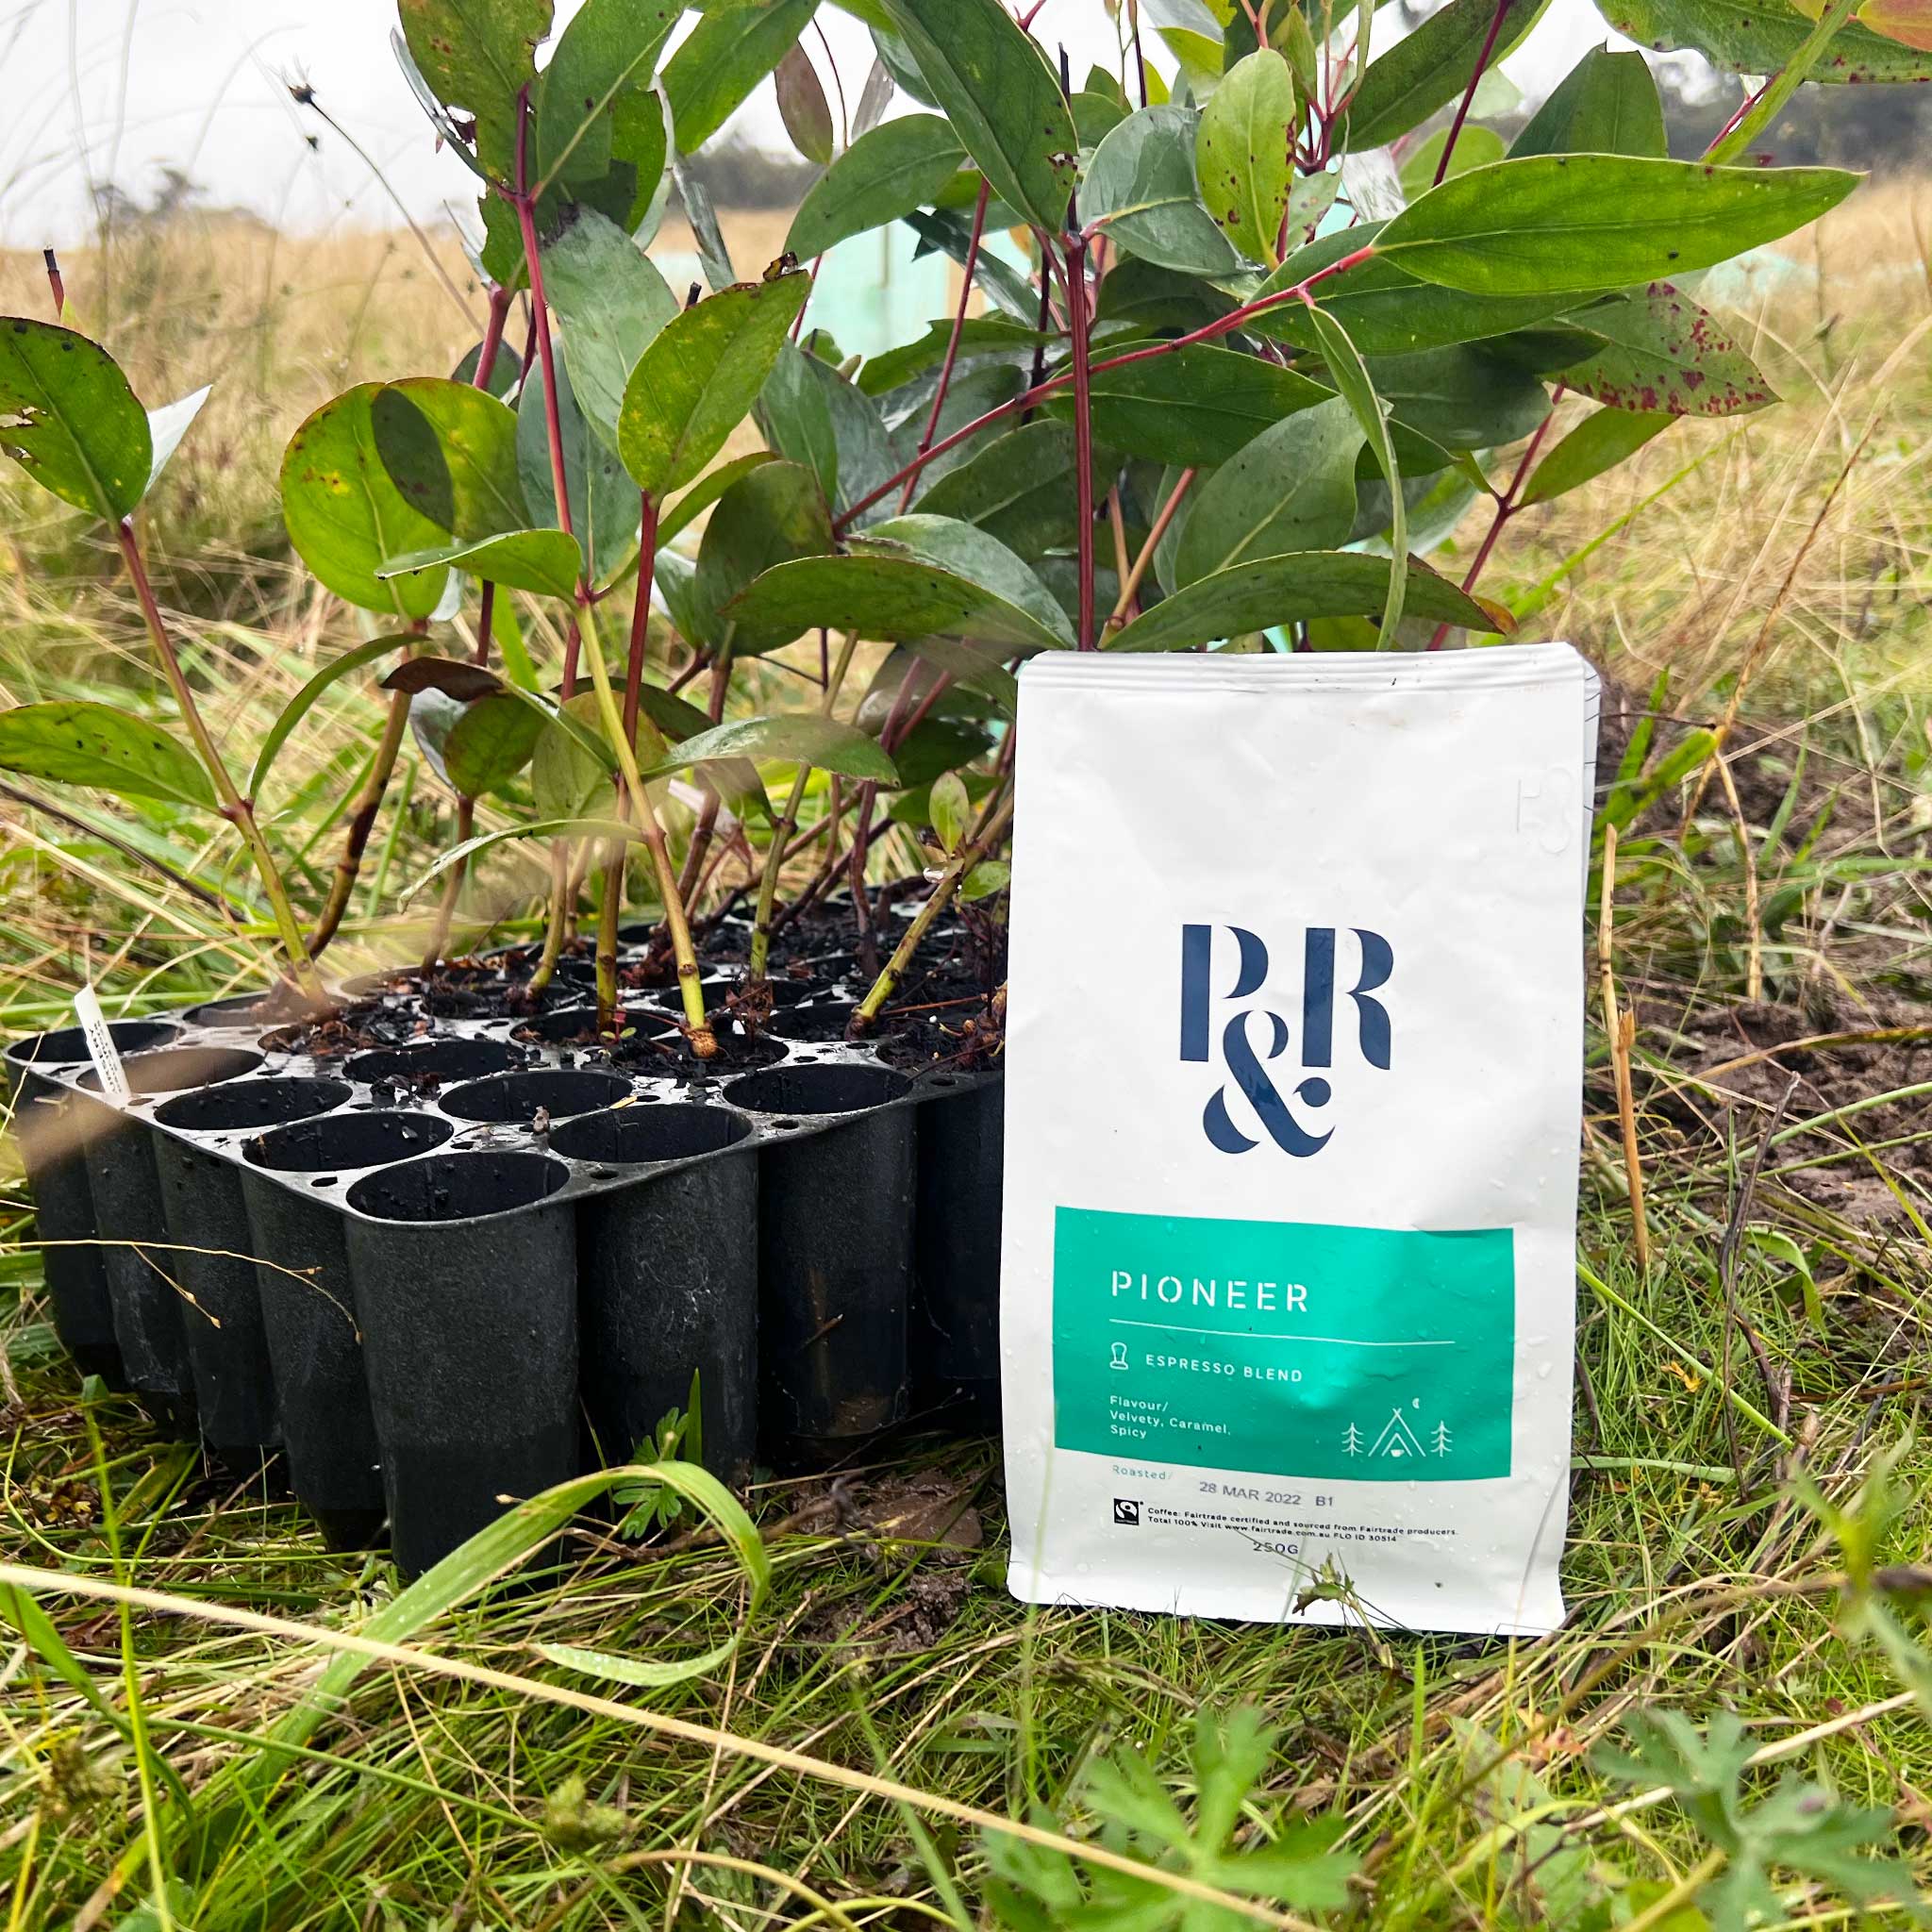 P&R Pioneer blend pack on the ground next to a tray of tree saplings